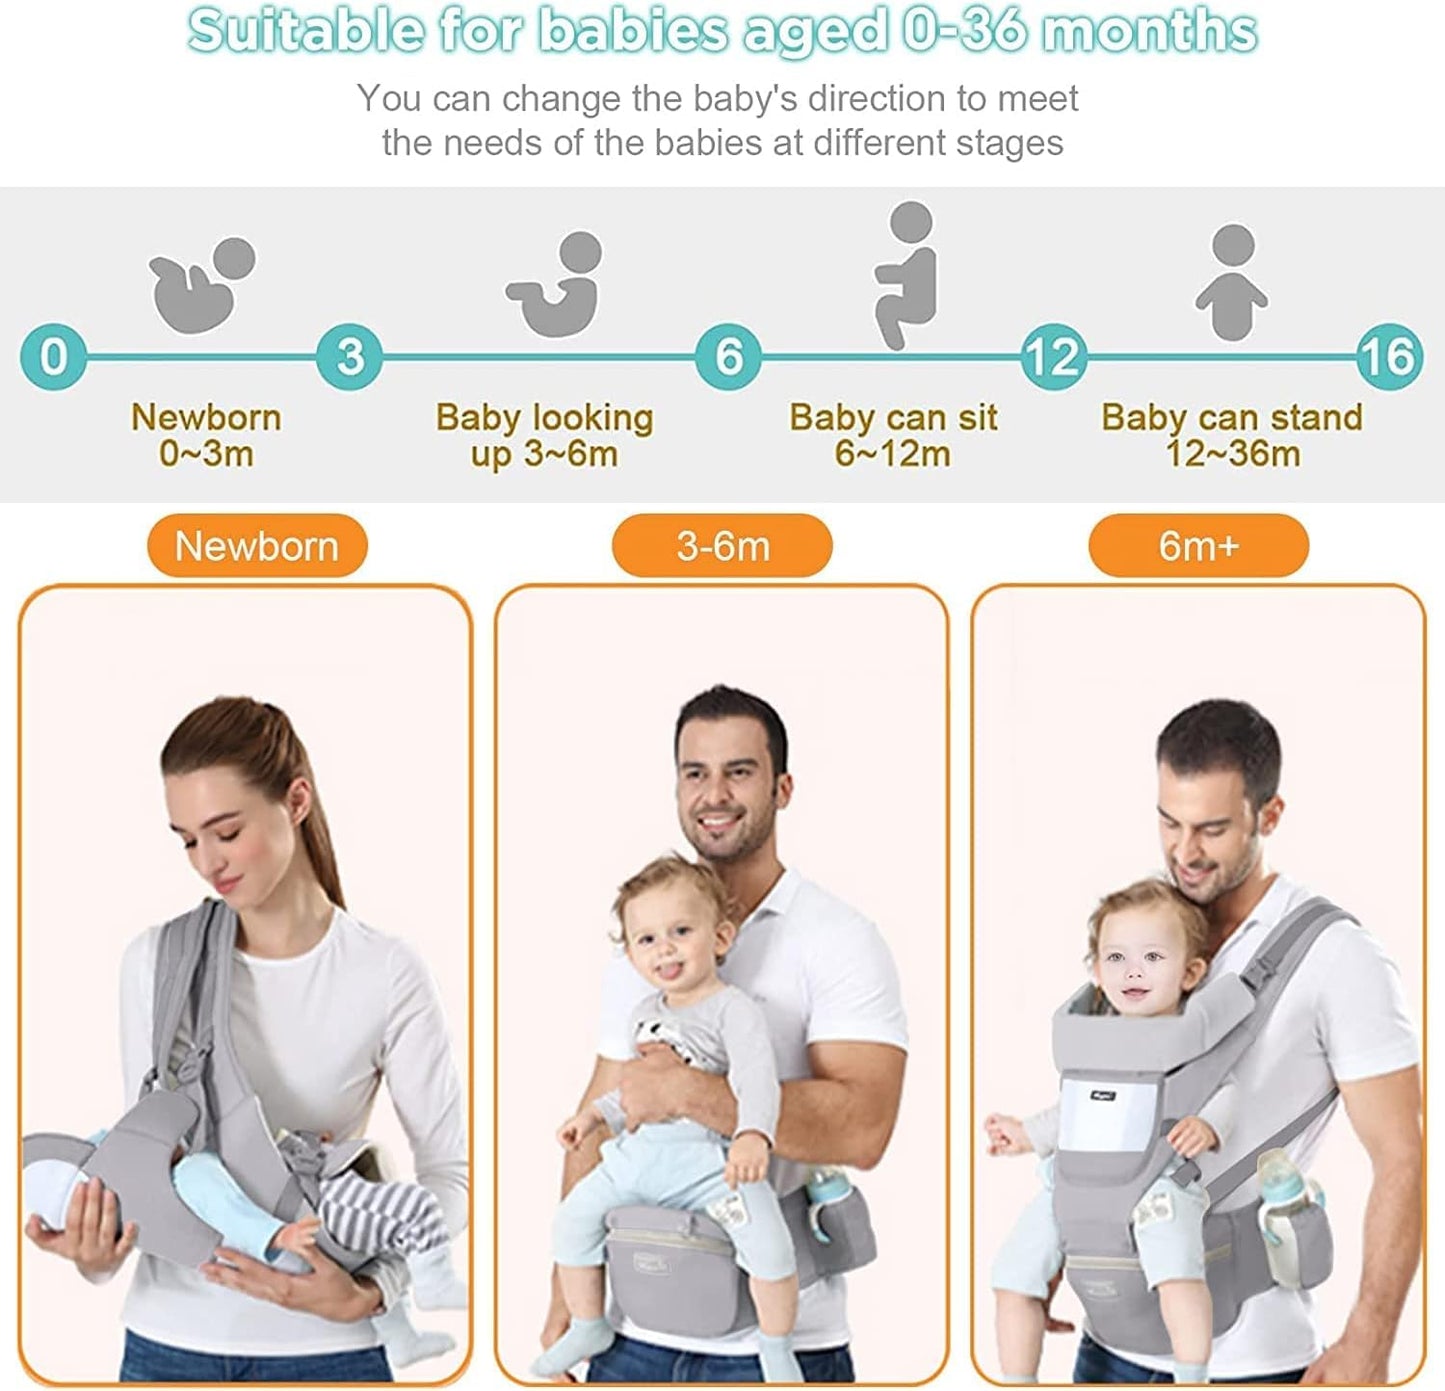 Deal Hunt 6 in 1 Baby Carrier Hip Seat, Multifunctional Baby Strap Waist Carrier for walking, Shopping, Trip, Hiking - Adjustable Size & Suitable for 0-36 Months Baby with Gift Box Packaging (Grey)